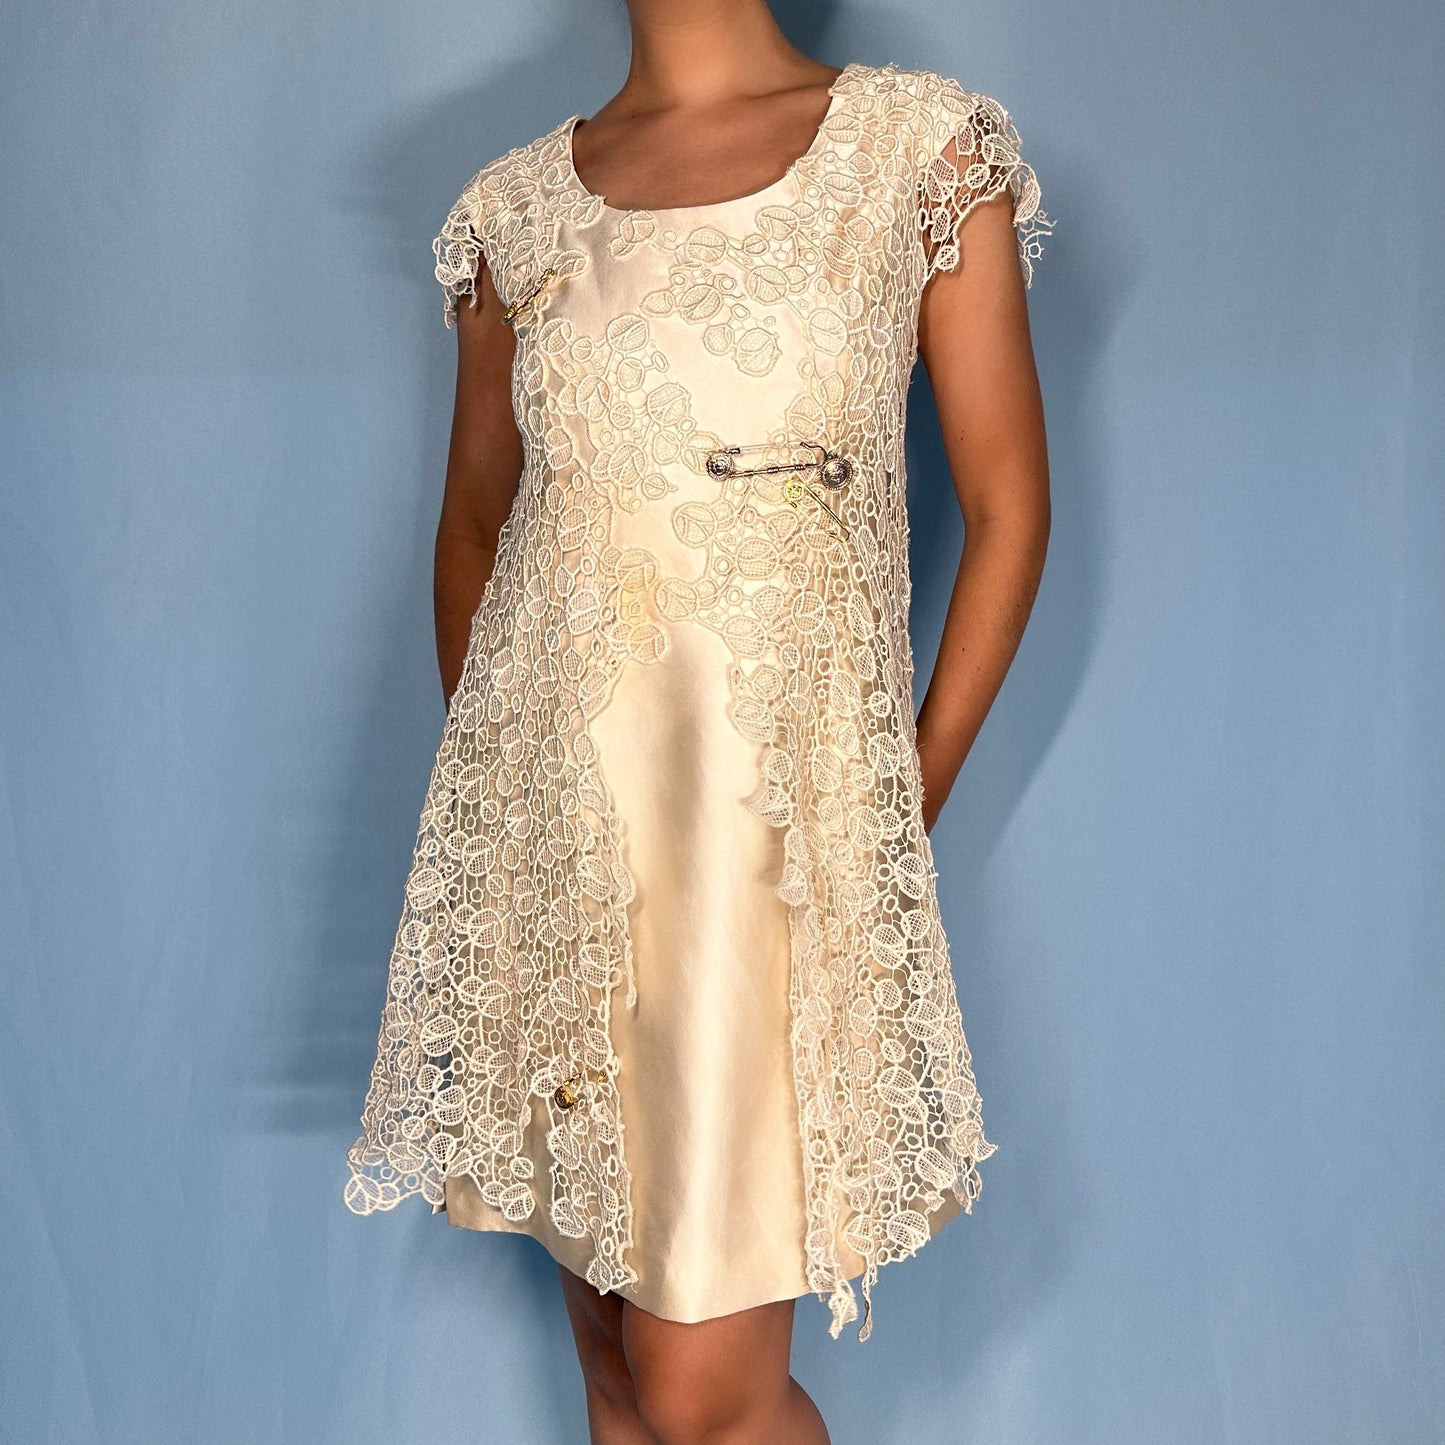 Versace Spring 1994 Safety Pin White Silk Lace Dress